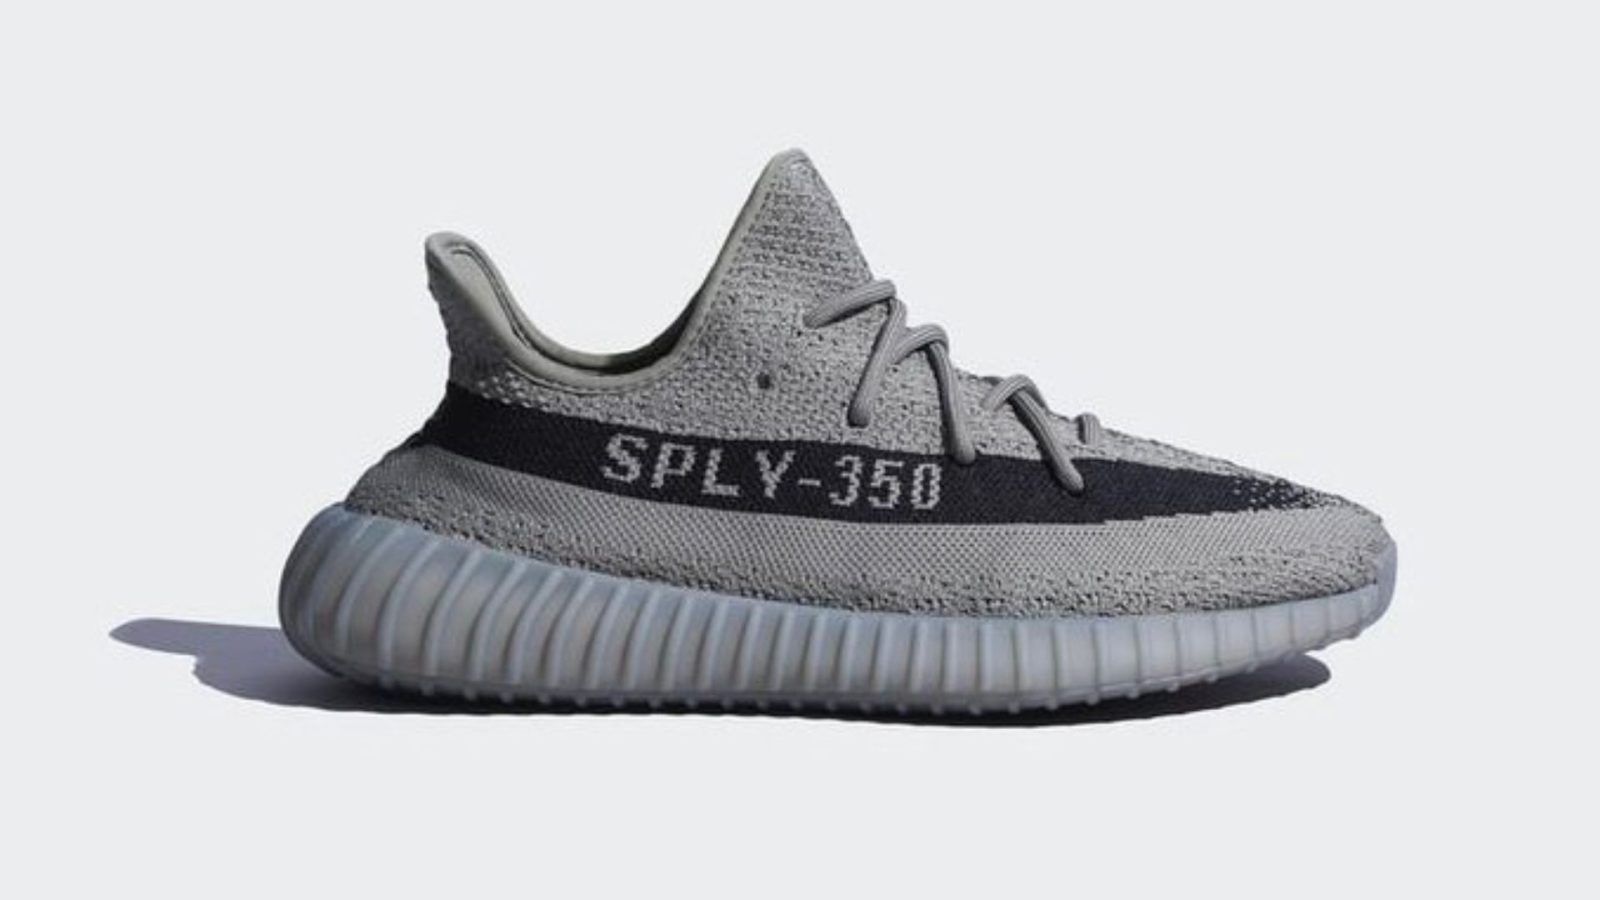 Adidas is releasing unbranded YEEZY 350 V2 without Ye branding